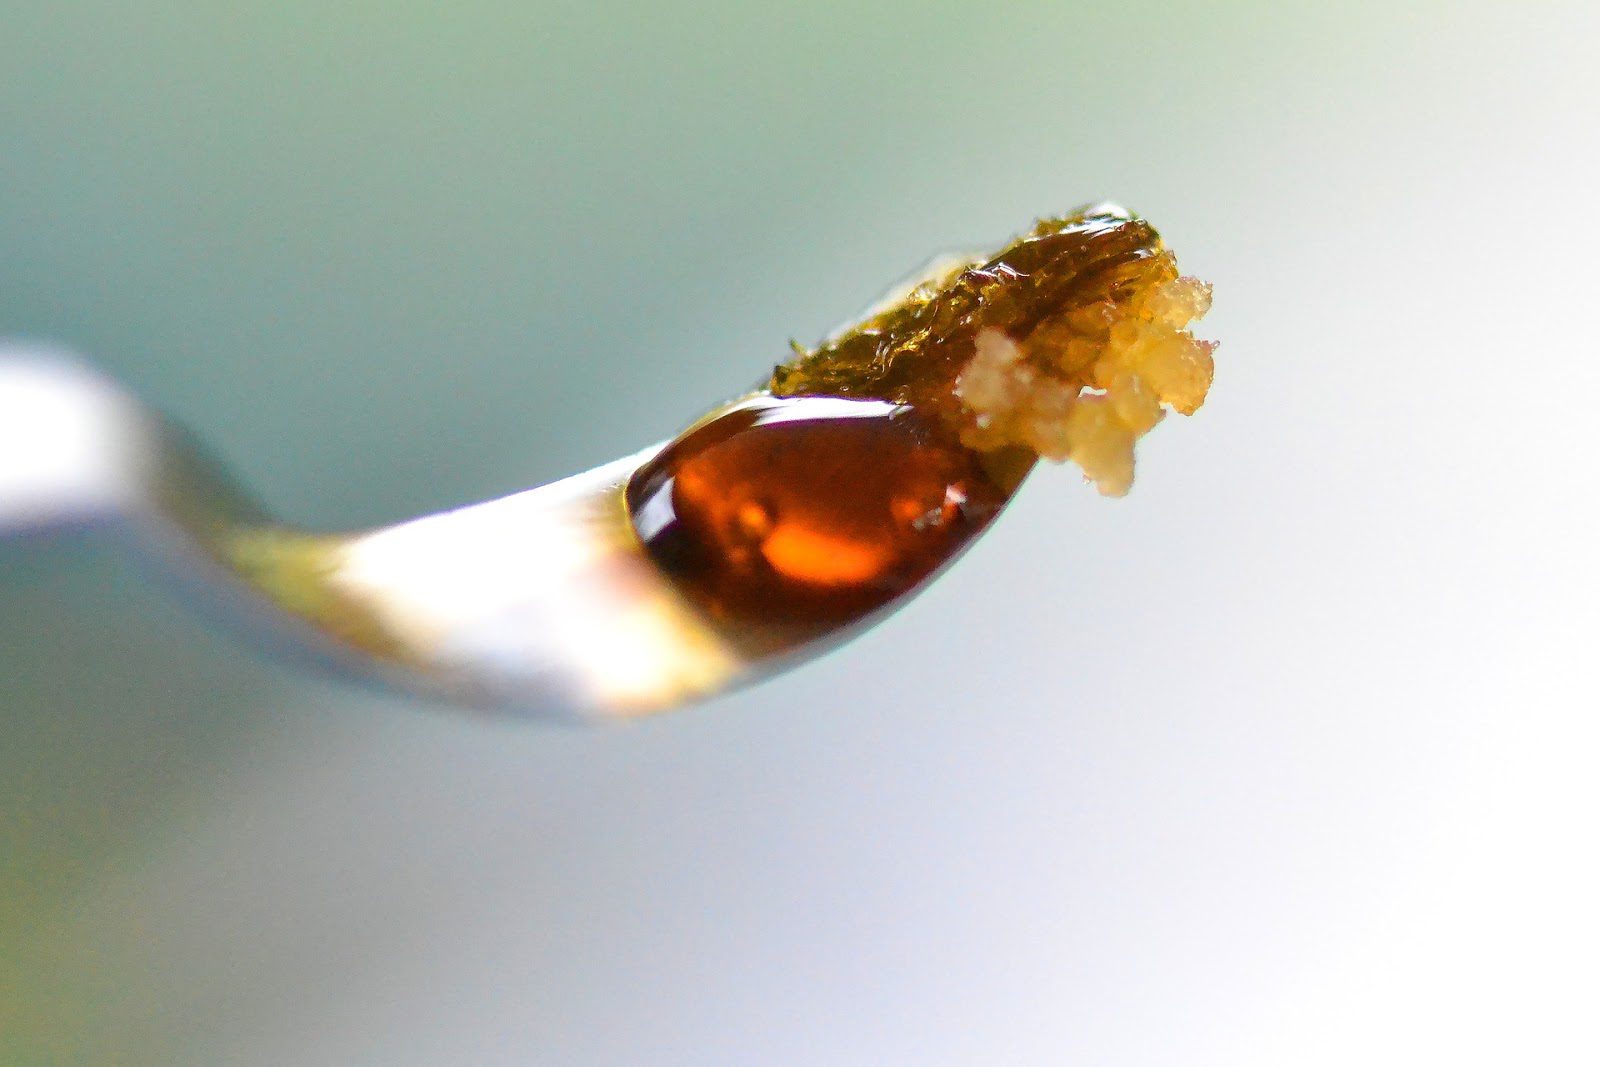 Live Resin vs. Cured Resin: What’s the Difference?